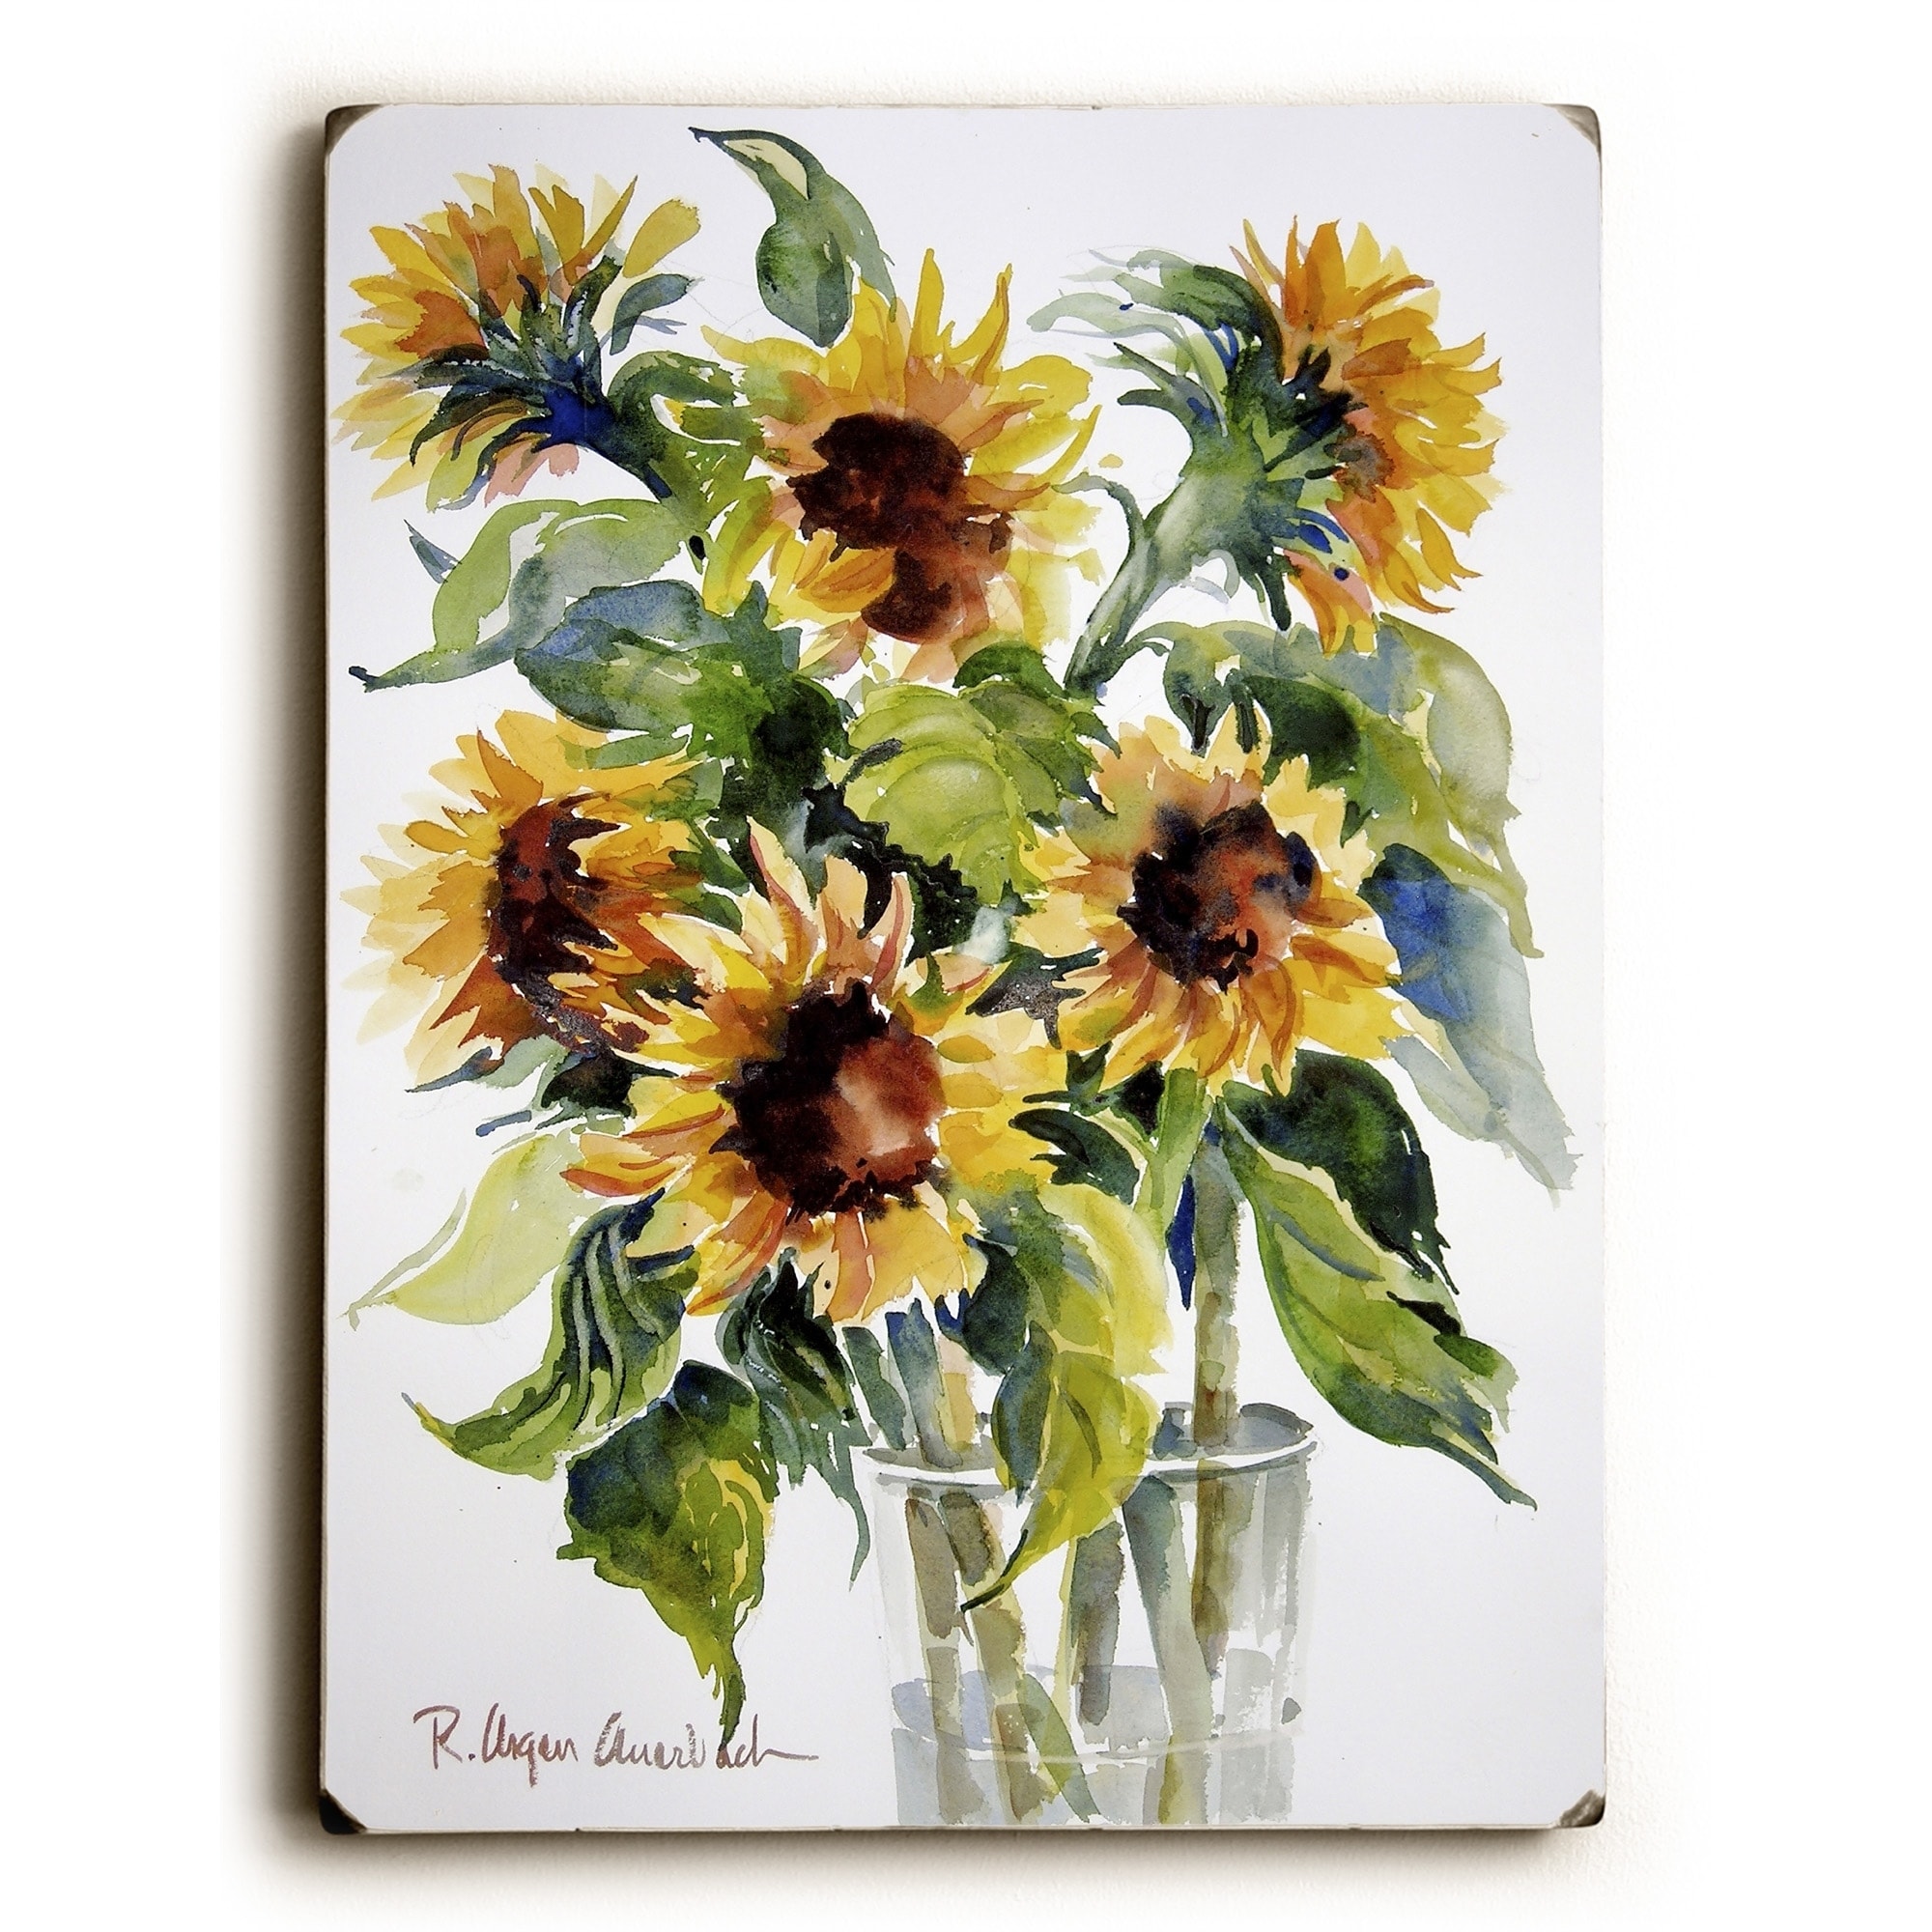 Glass full of Sunflowers - Wall Decor by ArtLicensing